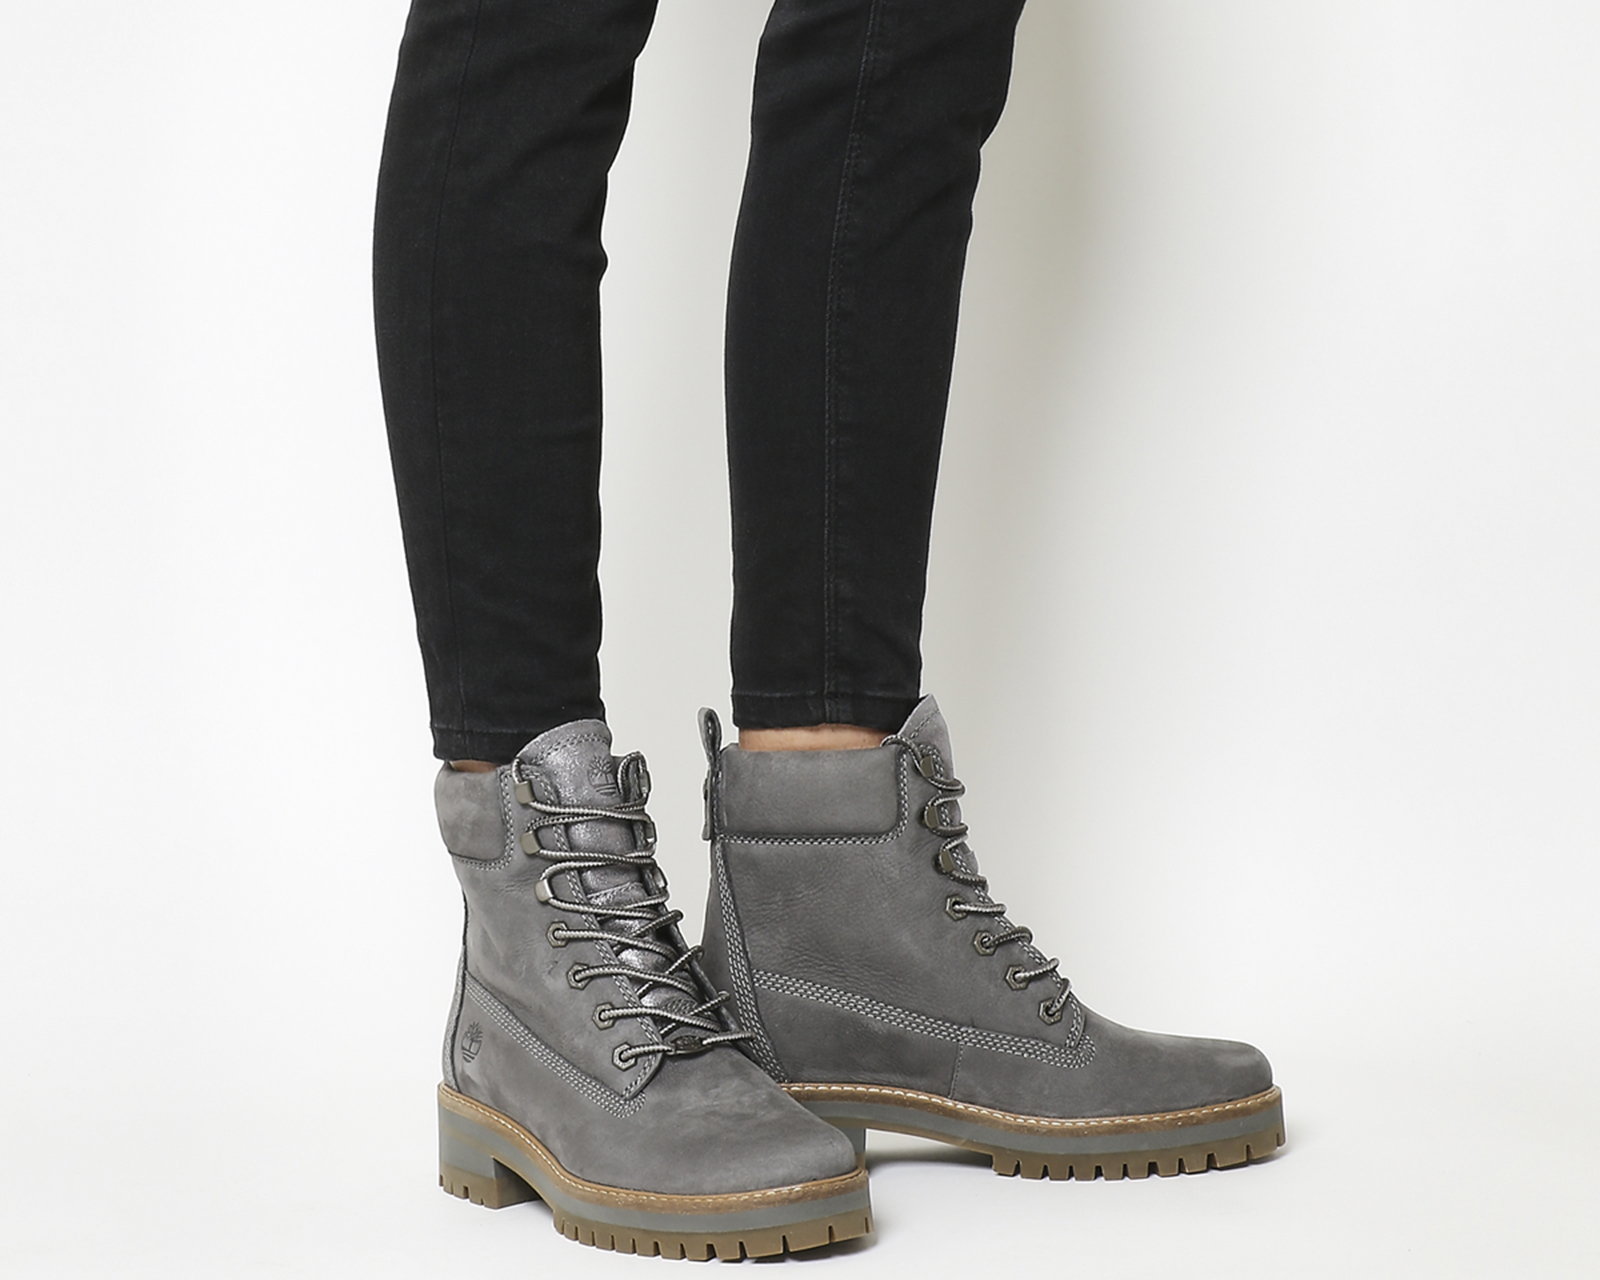 all grey timberland boots